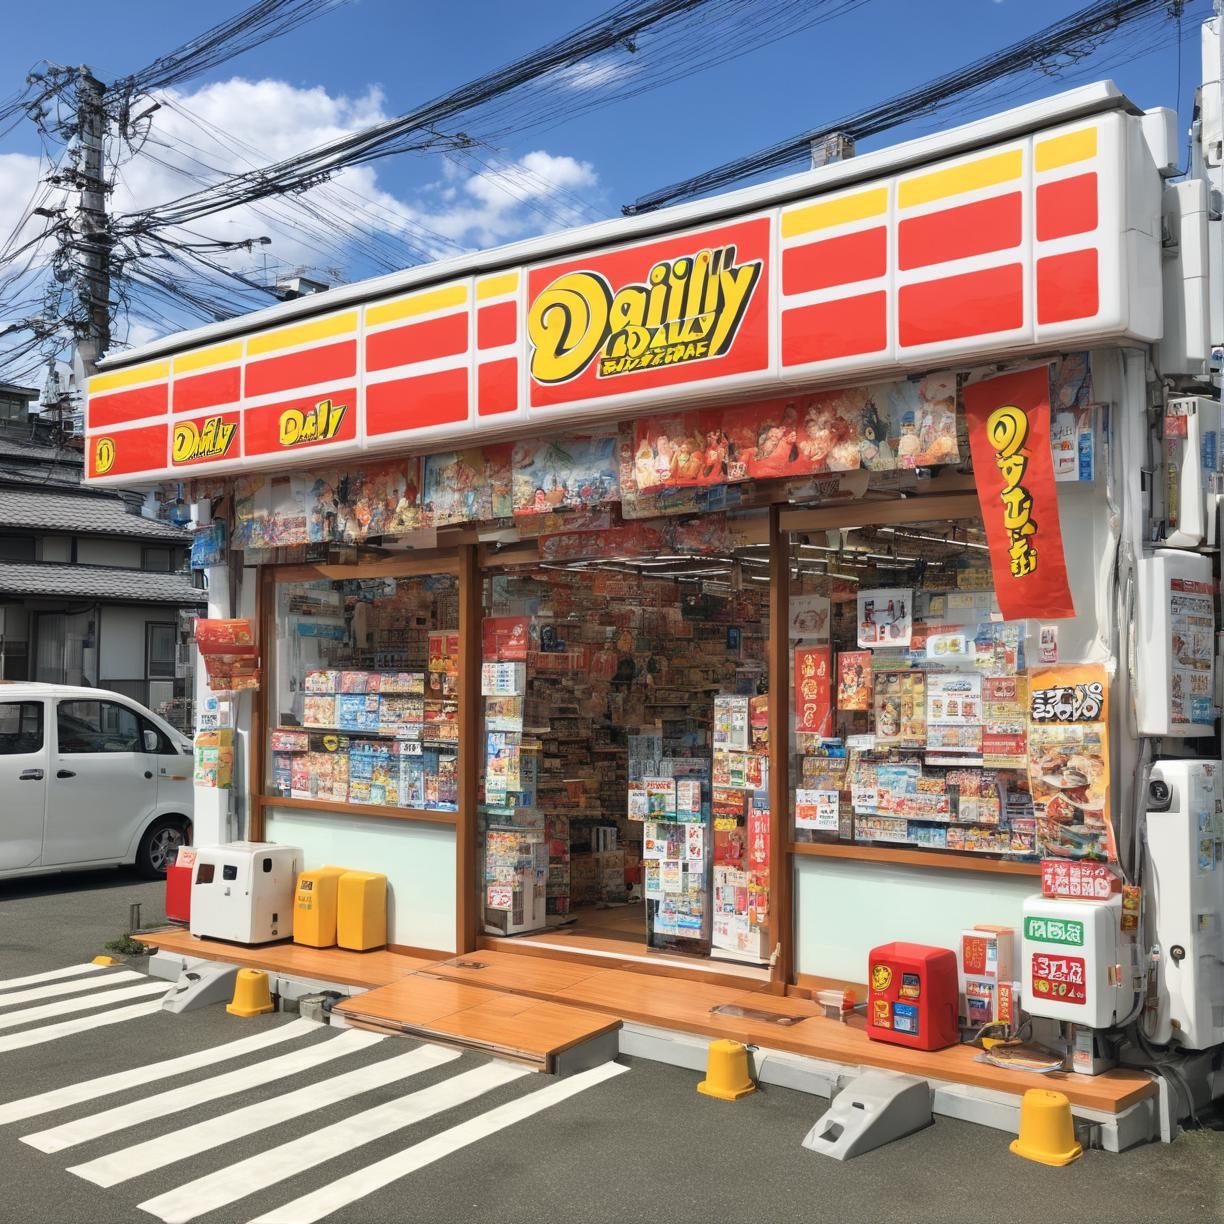 masterpiece, best quality, ultra-detailed, illustration,YamazakiDaily, konbini, scenery, storefront, japan, ground vehicle, outdoors, sky, cloud, motor vehicle, car, scenery, day, convenience store, road, blue sky, shop, power lines, utility pole, street <lora:YamazakiDairyStore_JAPAN_storefront_SDXL_V1:1>